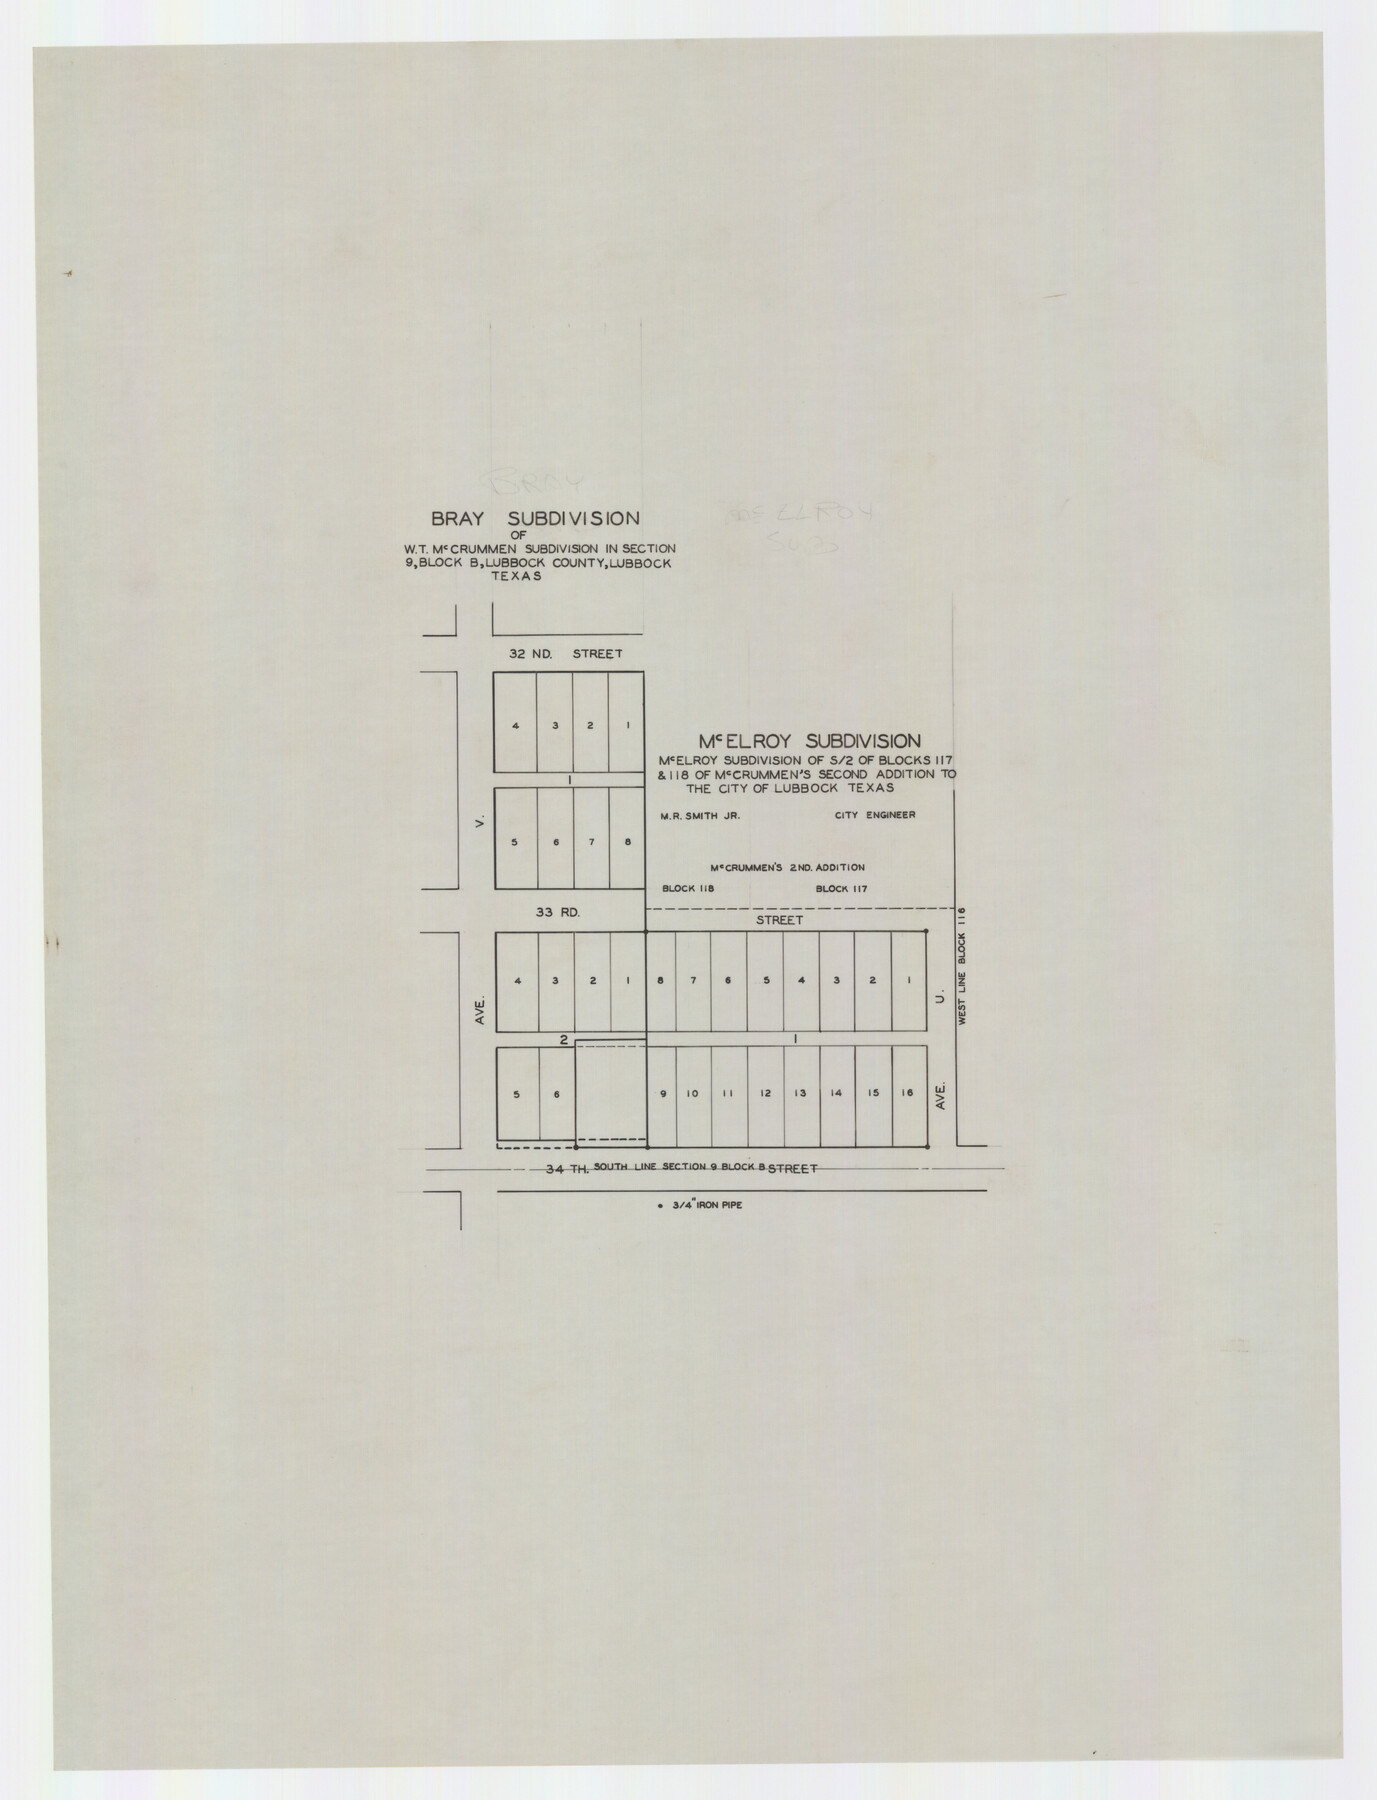 92746, Bray Subdivision and McElroy Subdivision, Twichell Survey Records